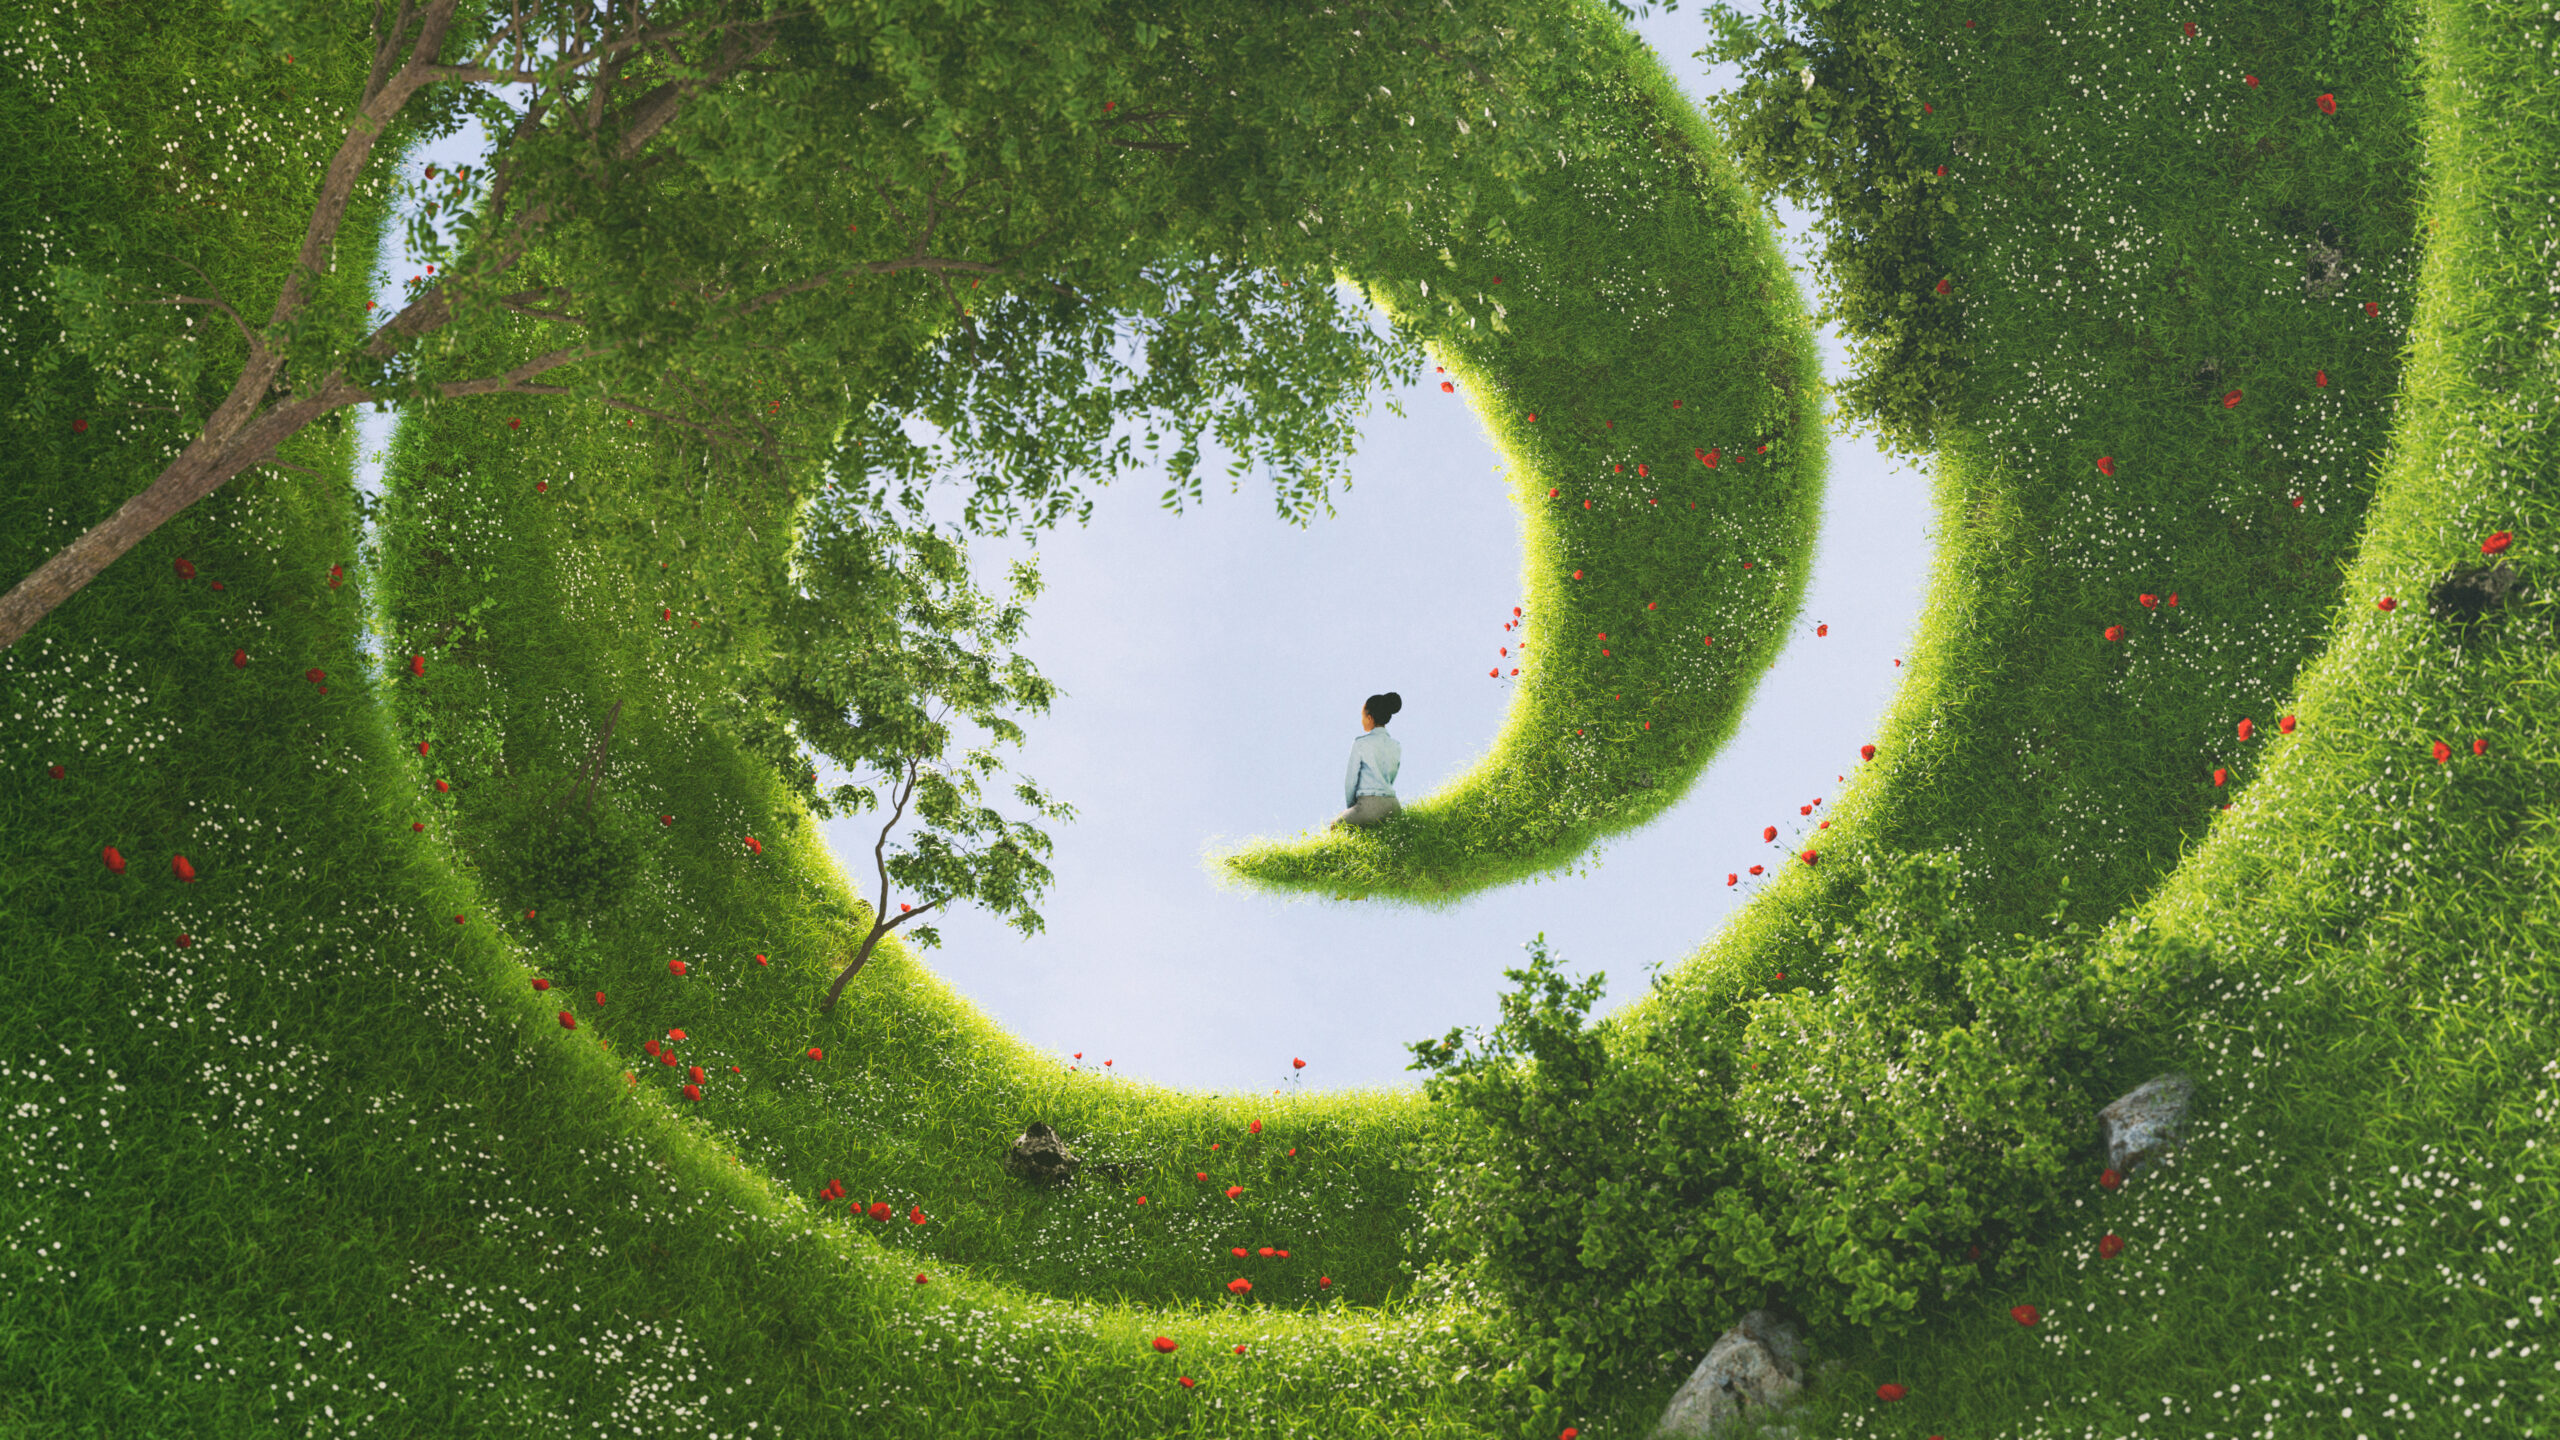 A female sitting at the end of a bizarre garden on a spiral landscape. All items in the scene are 3D